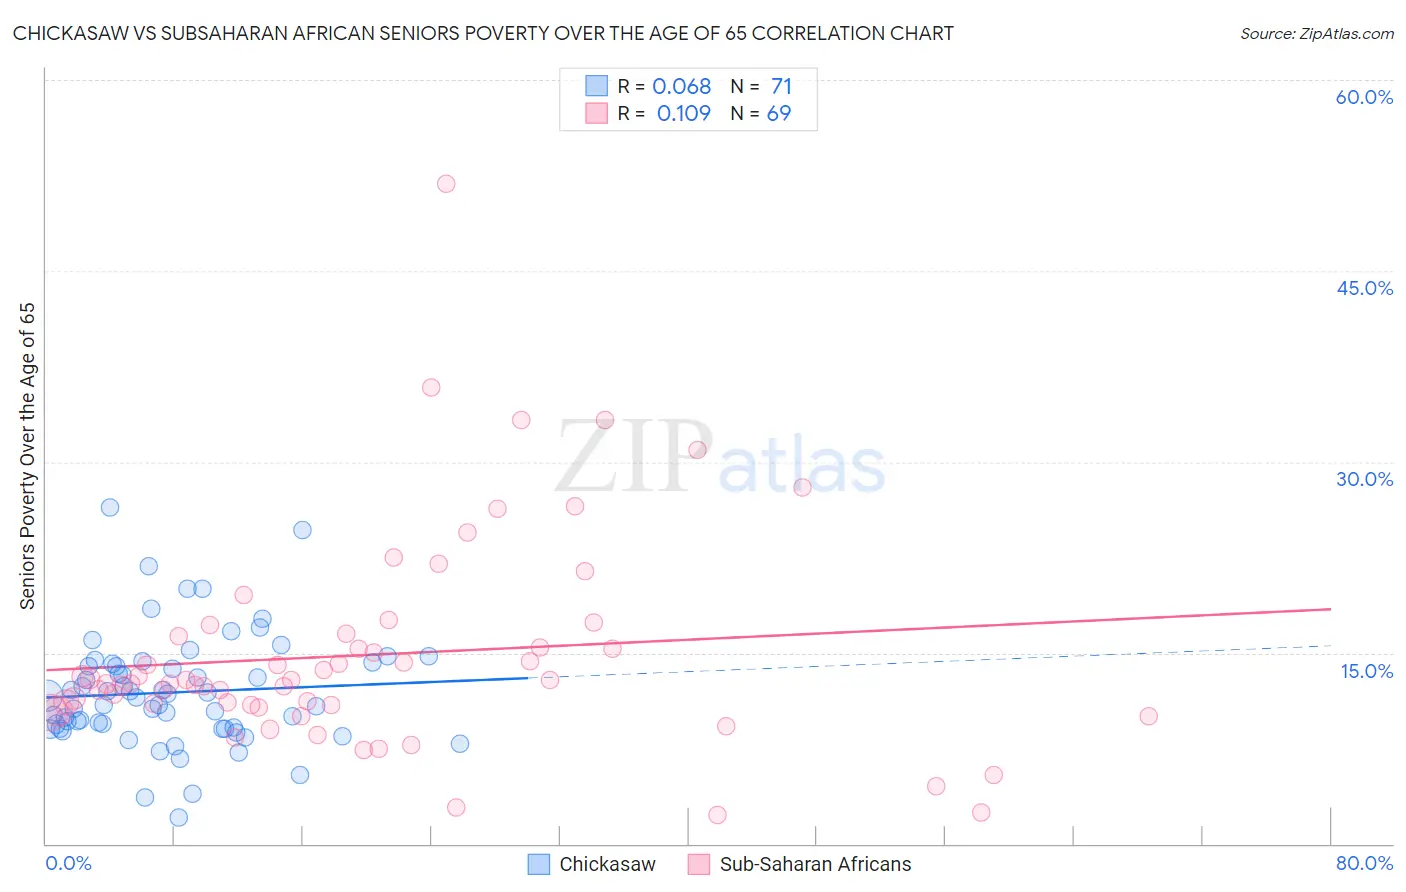 Chickasaw vs Subsaharan African Seniors Poverty Over the Age of 65